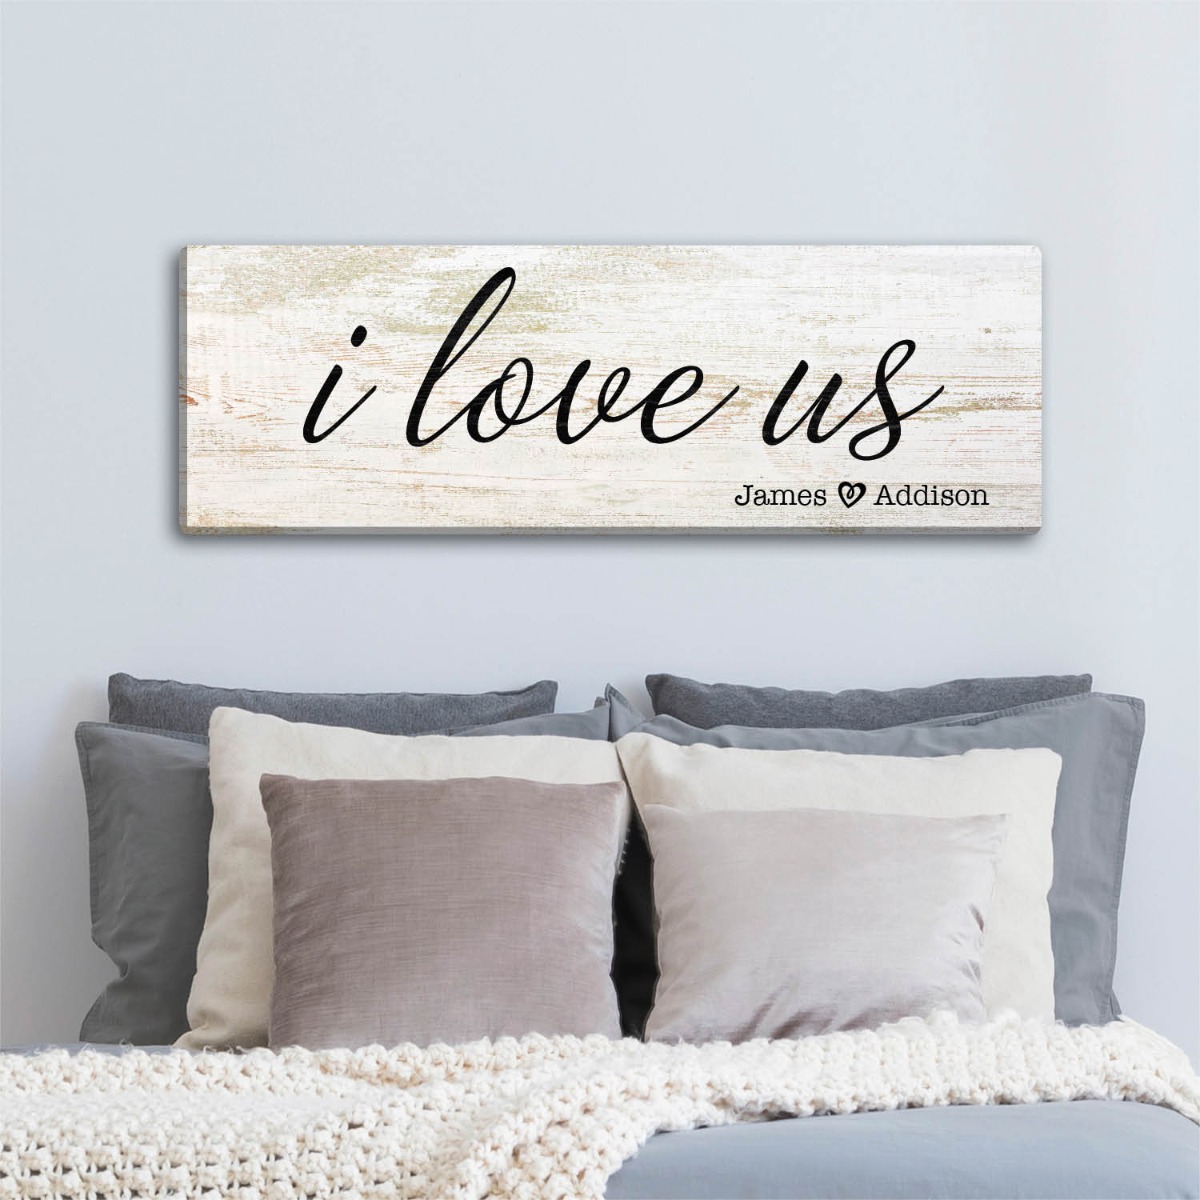 I love us gallery canvas with names